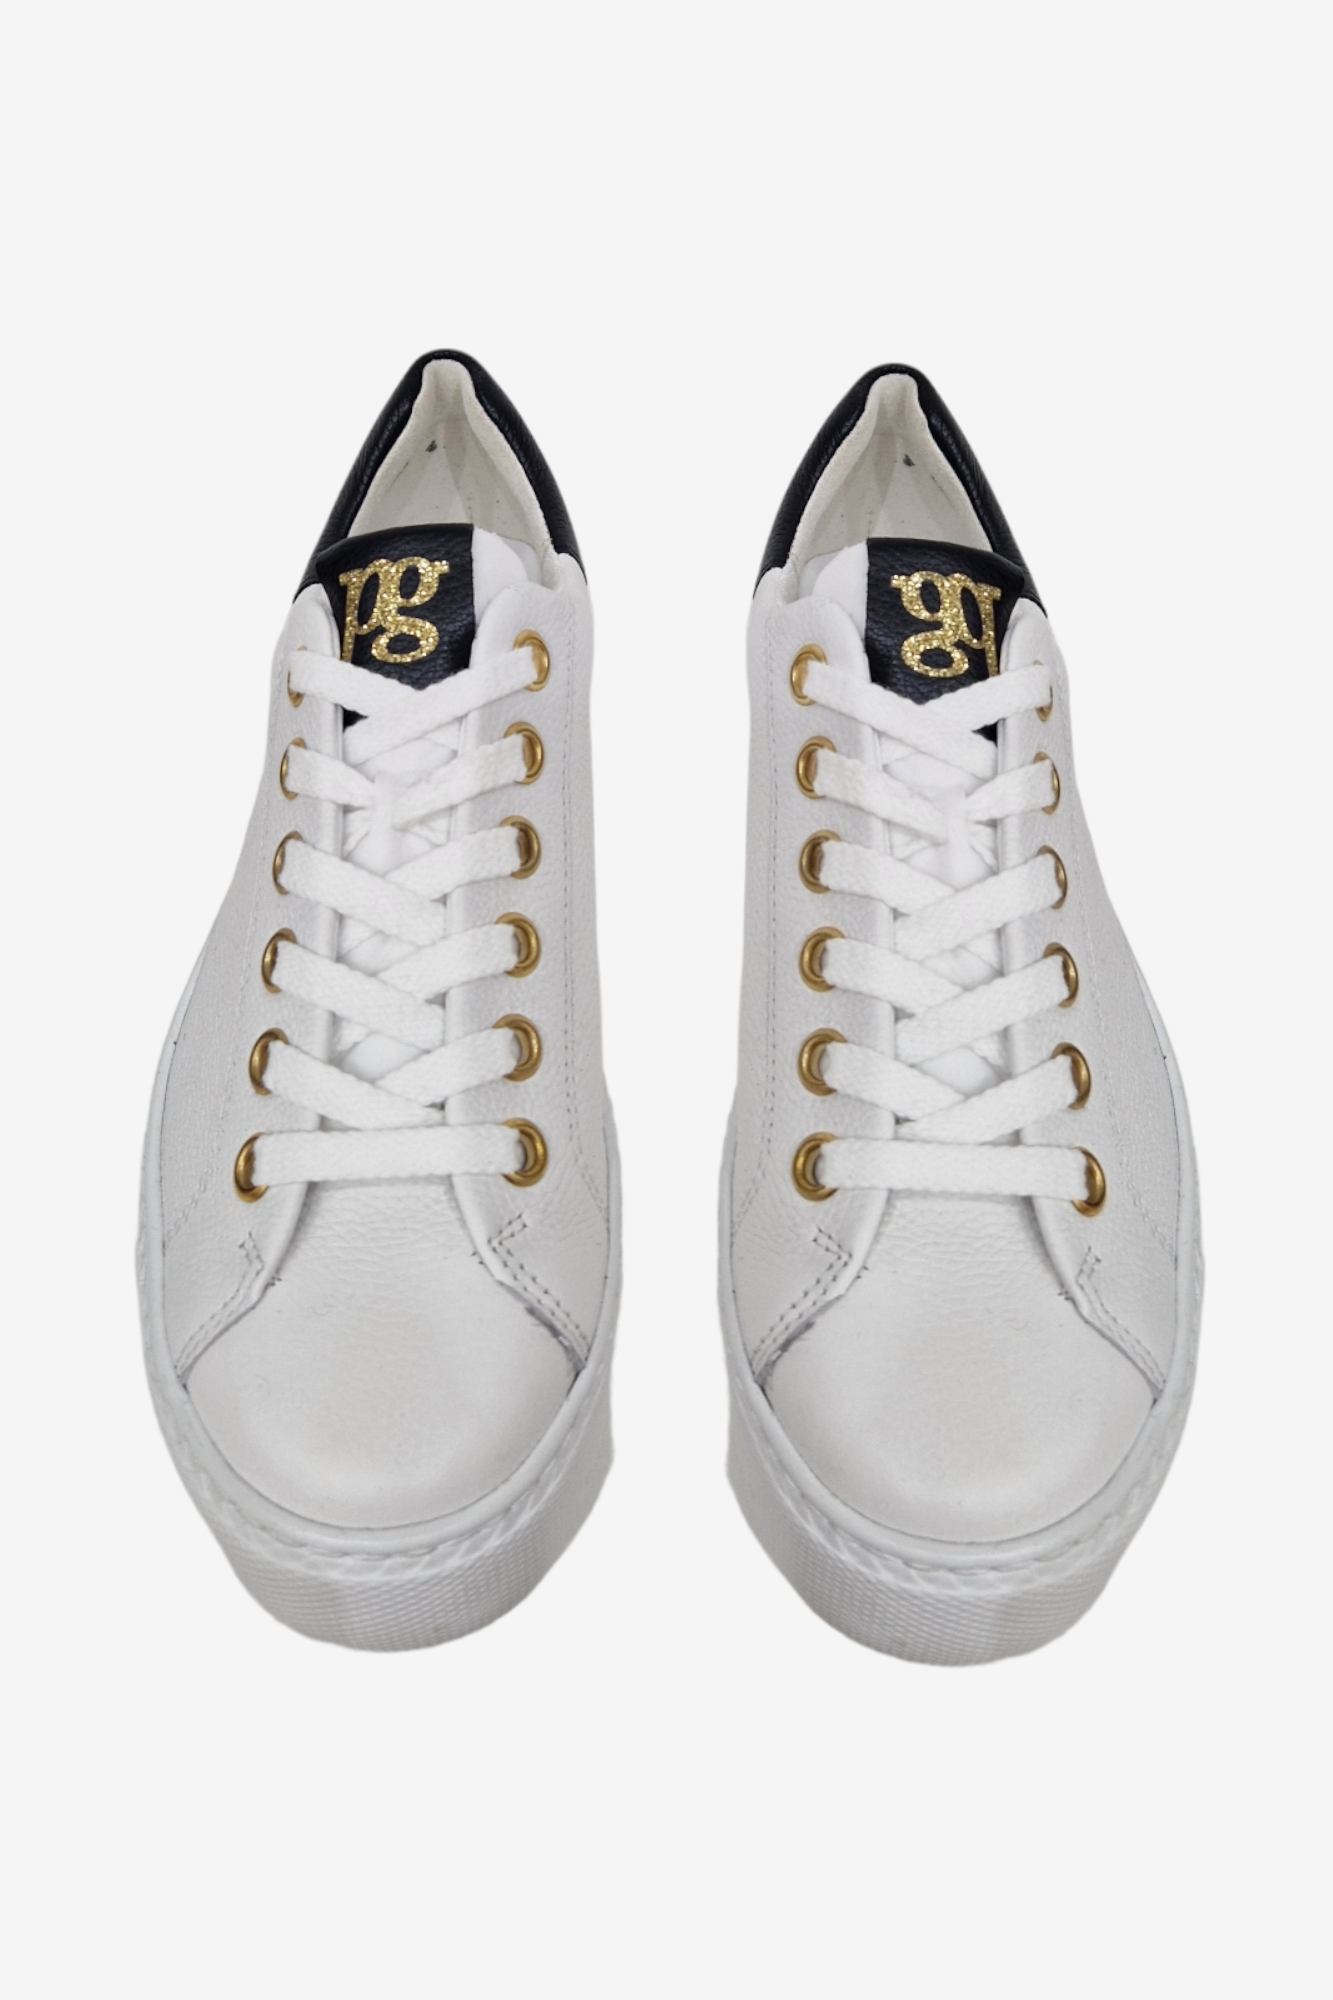 PAUL GREEN 5320 WHITE/BLACK LEATHER TRAINER